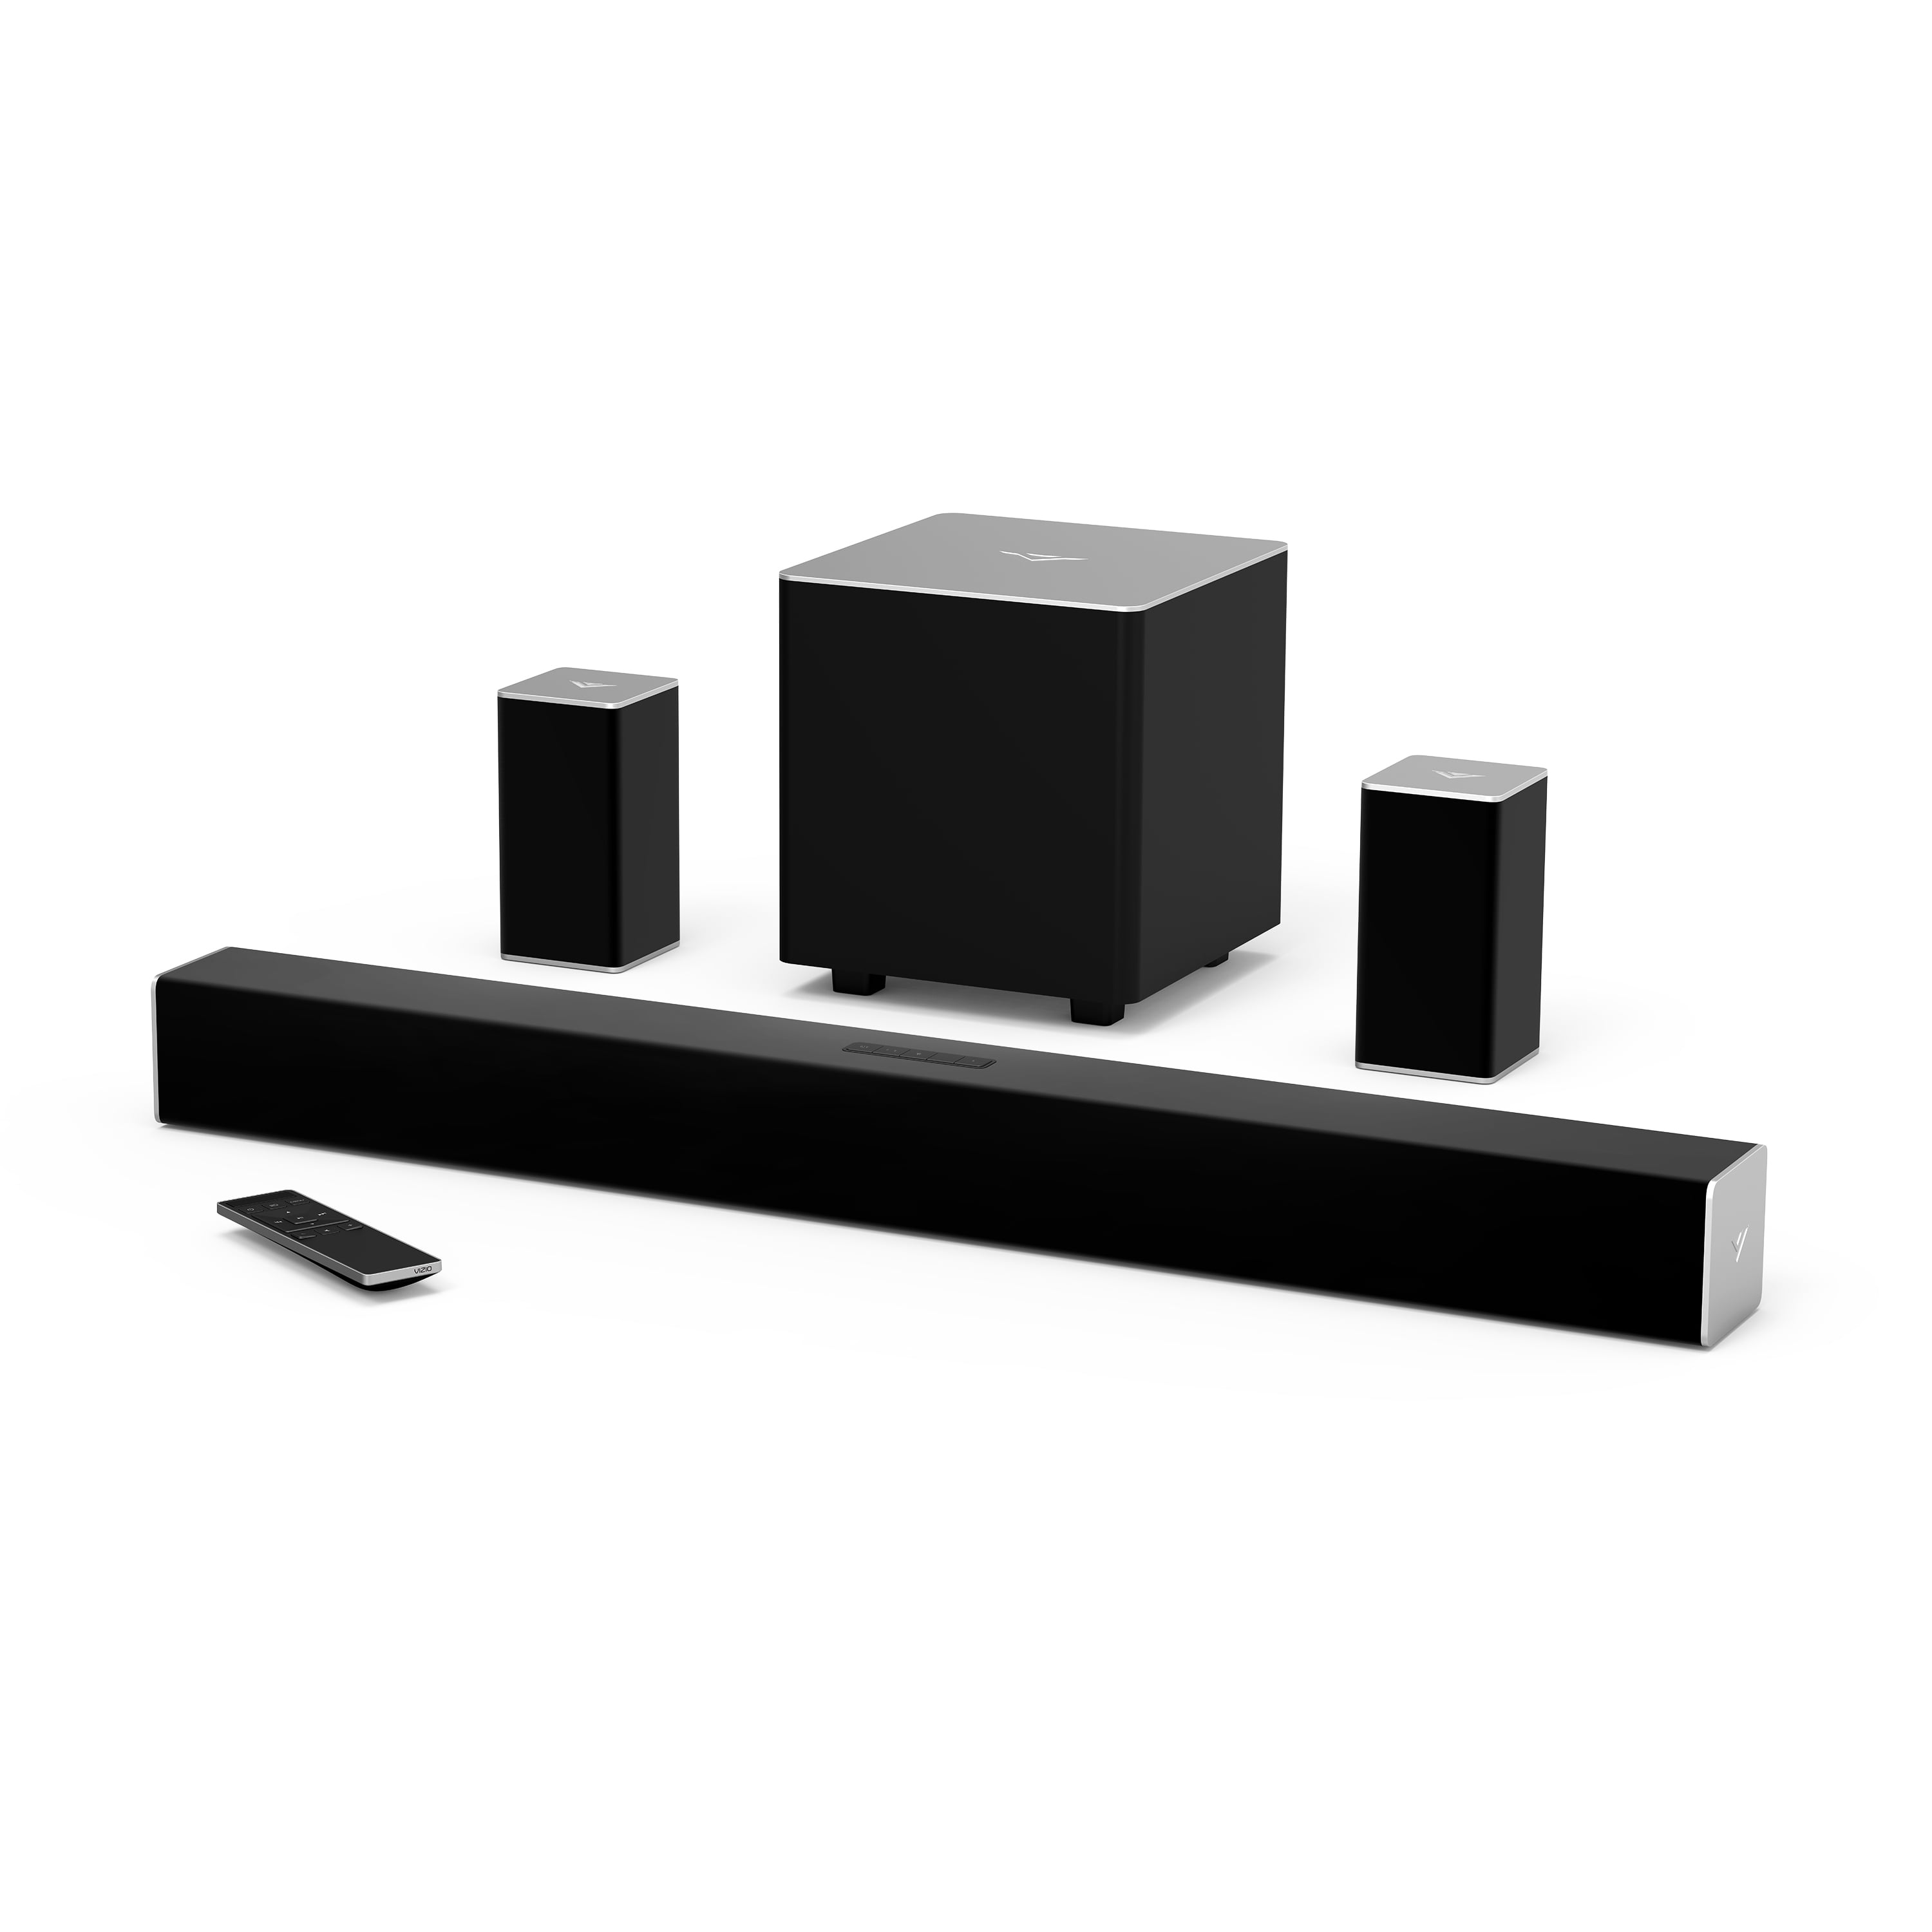 32" 5.1 Channel Soundbar System with Wireless Subwoofer and Rear Speakers SB3251n-E0 - Walmart.com